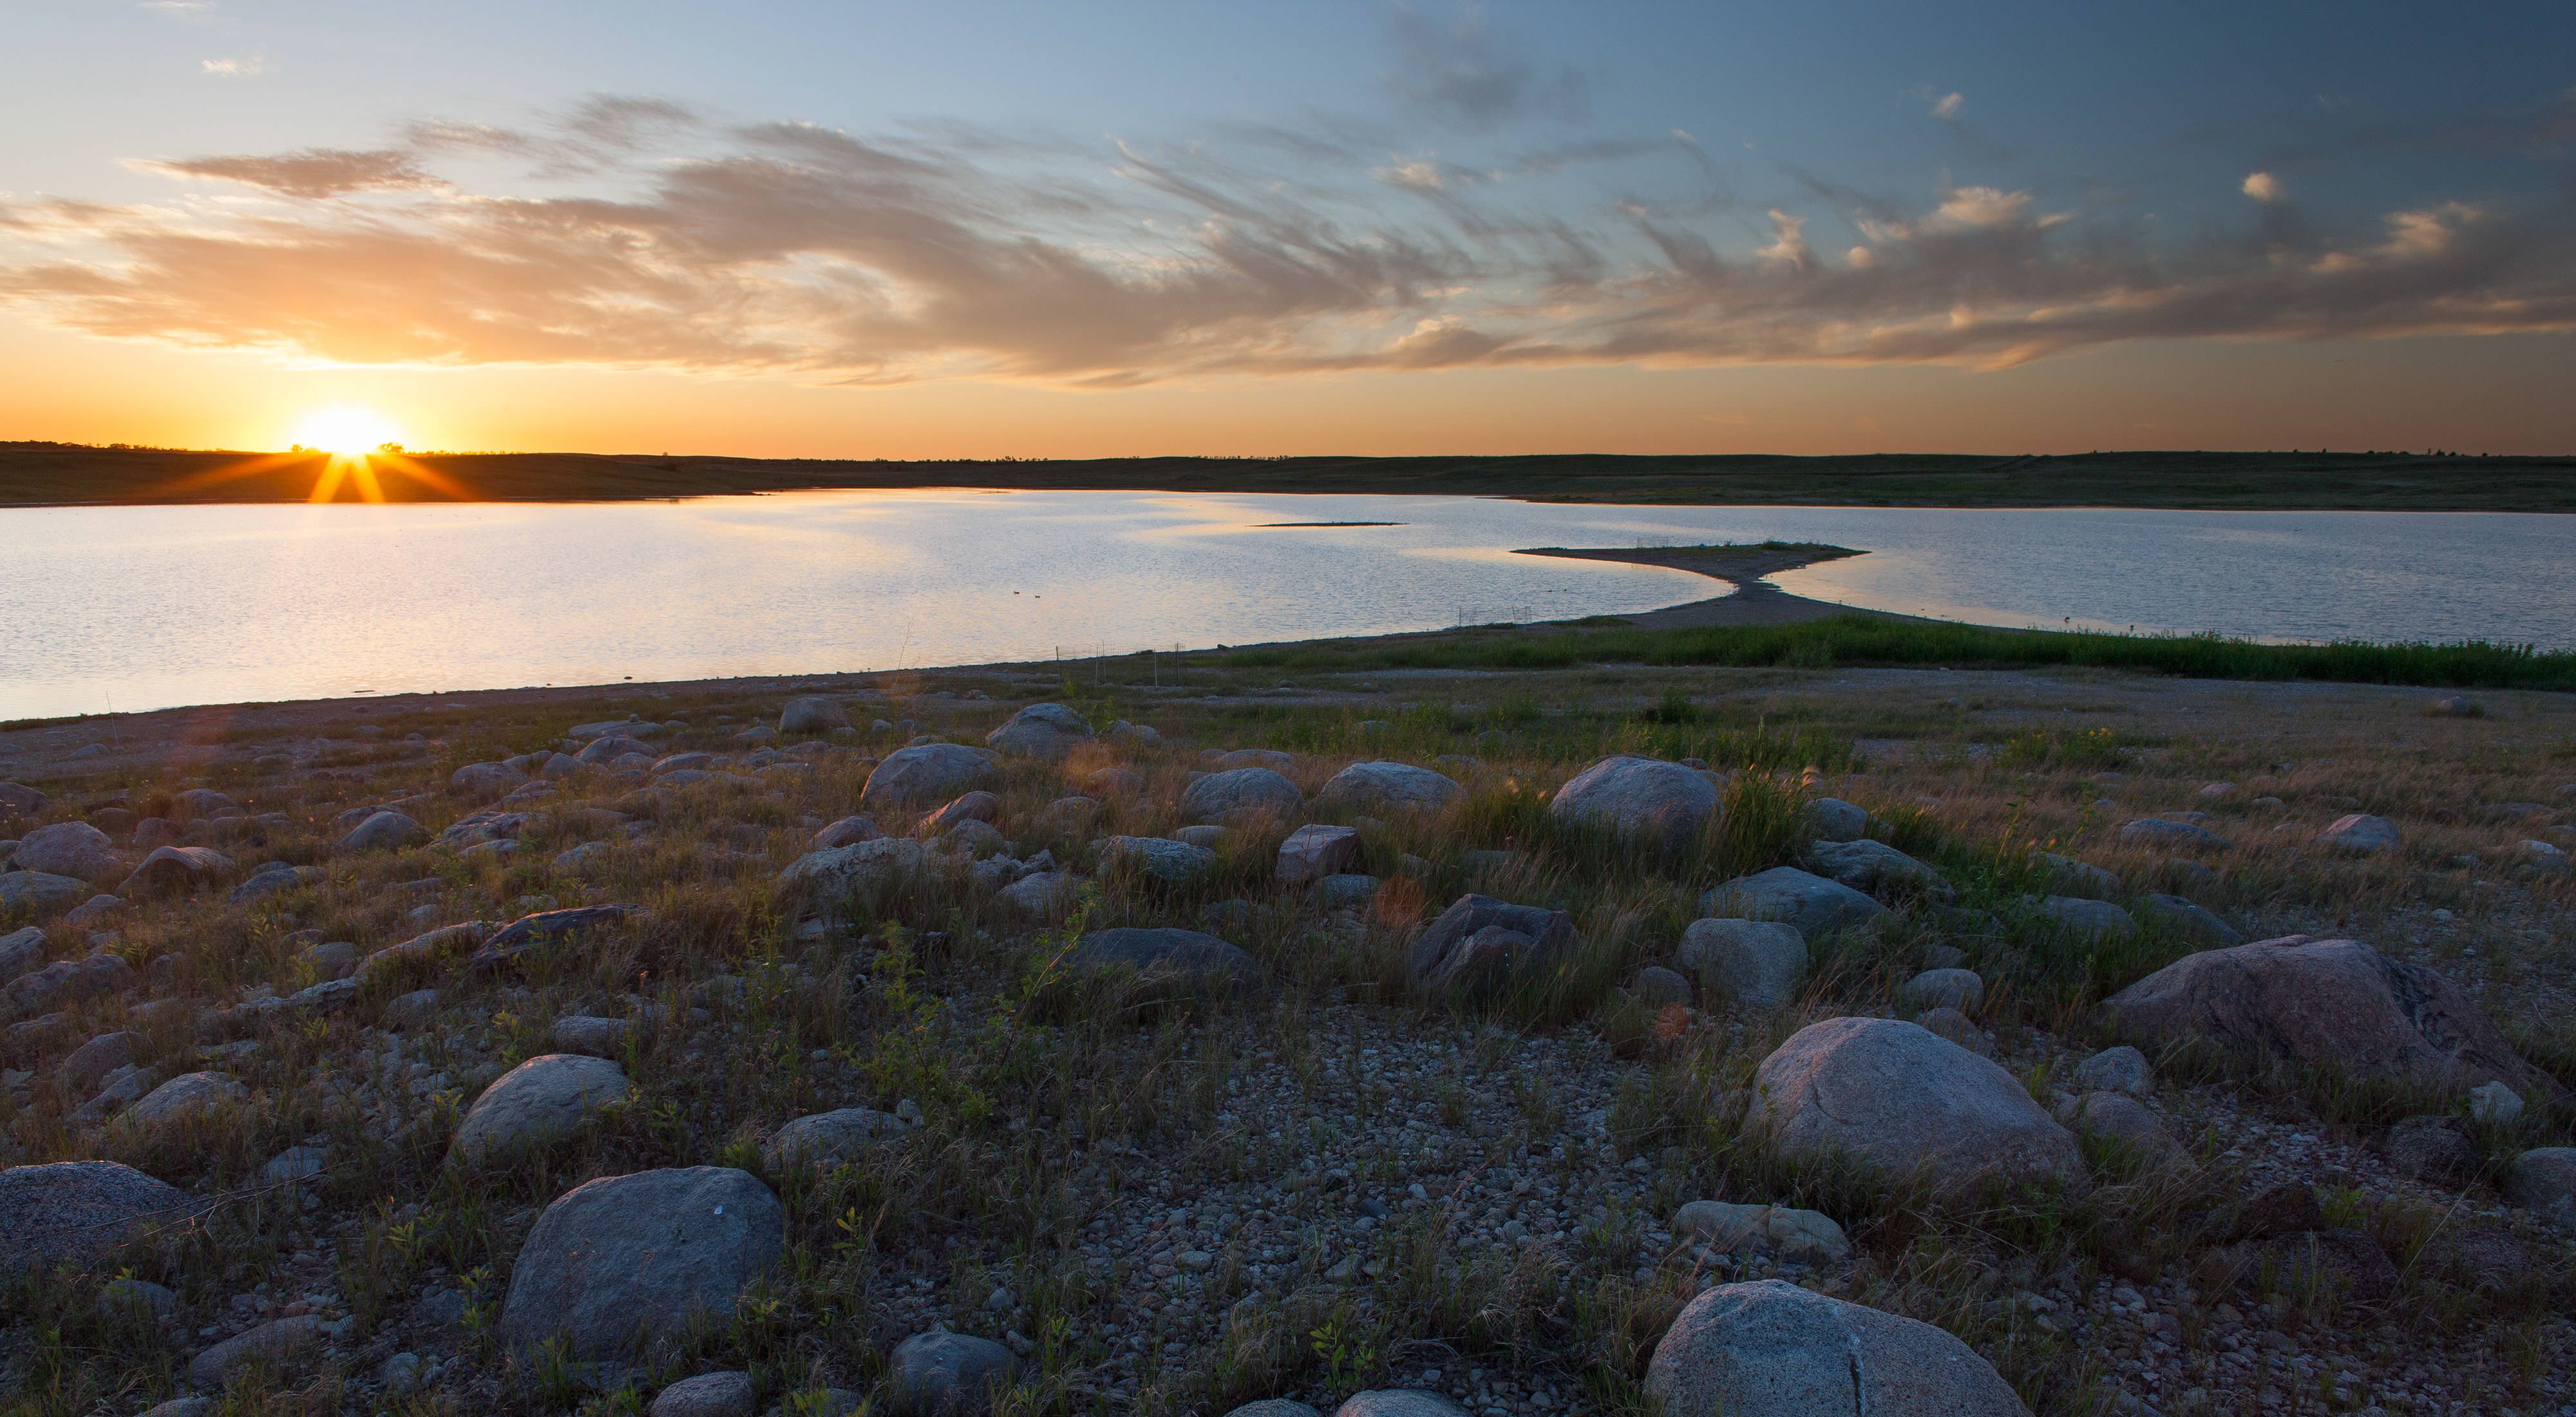 Ponds on a flat prairie strewn with rounded rocks.